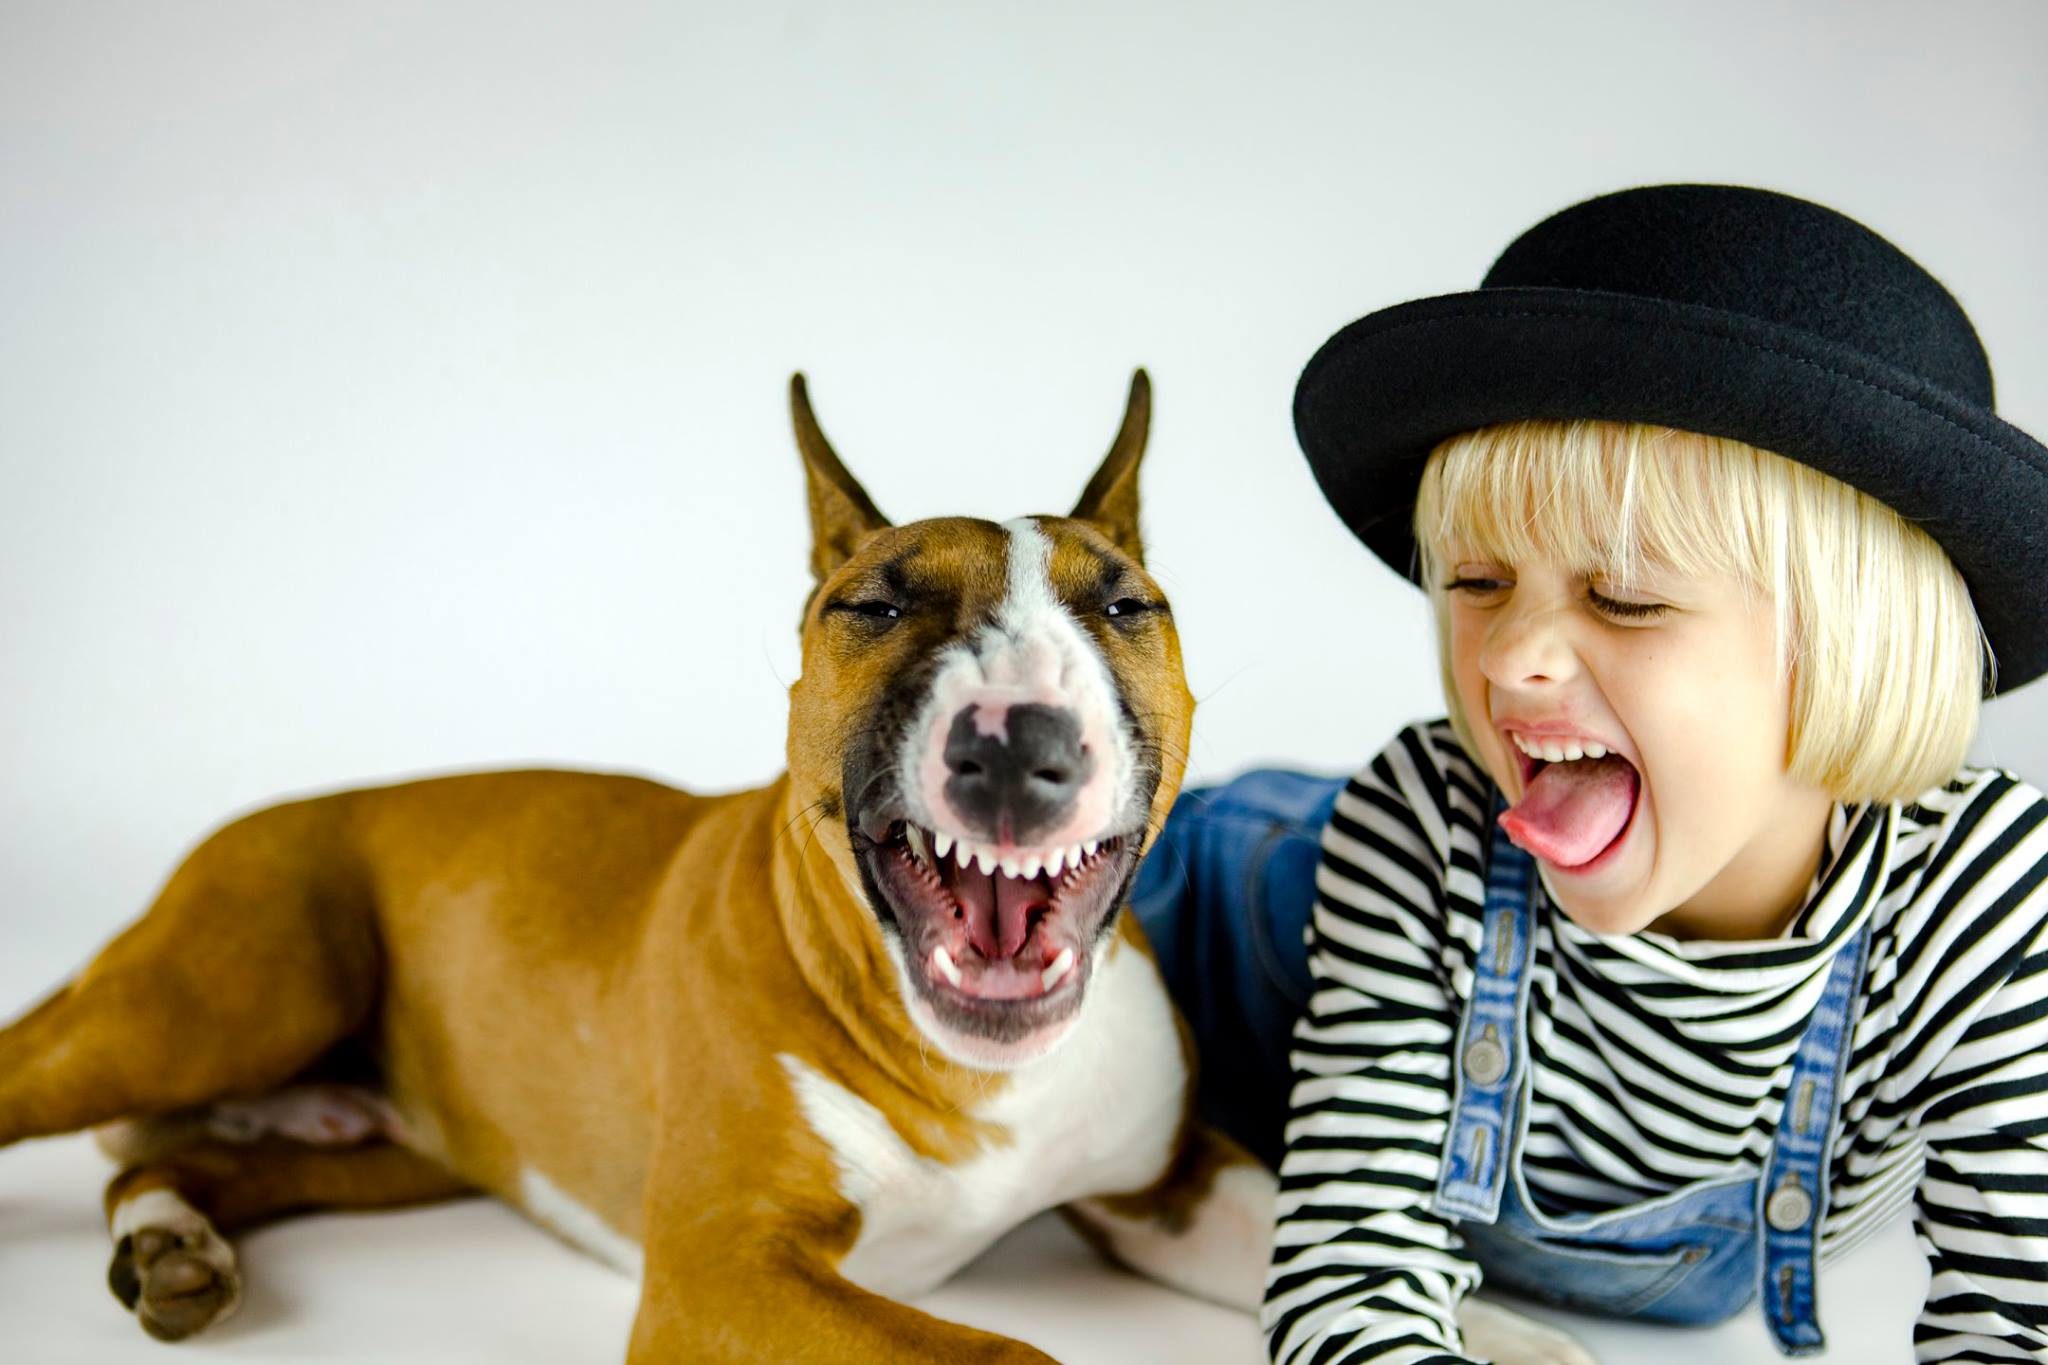 Little girl and her dog both stick their tongues out